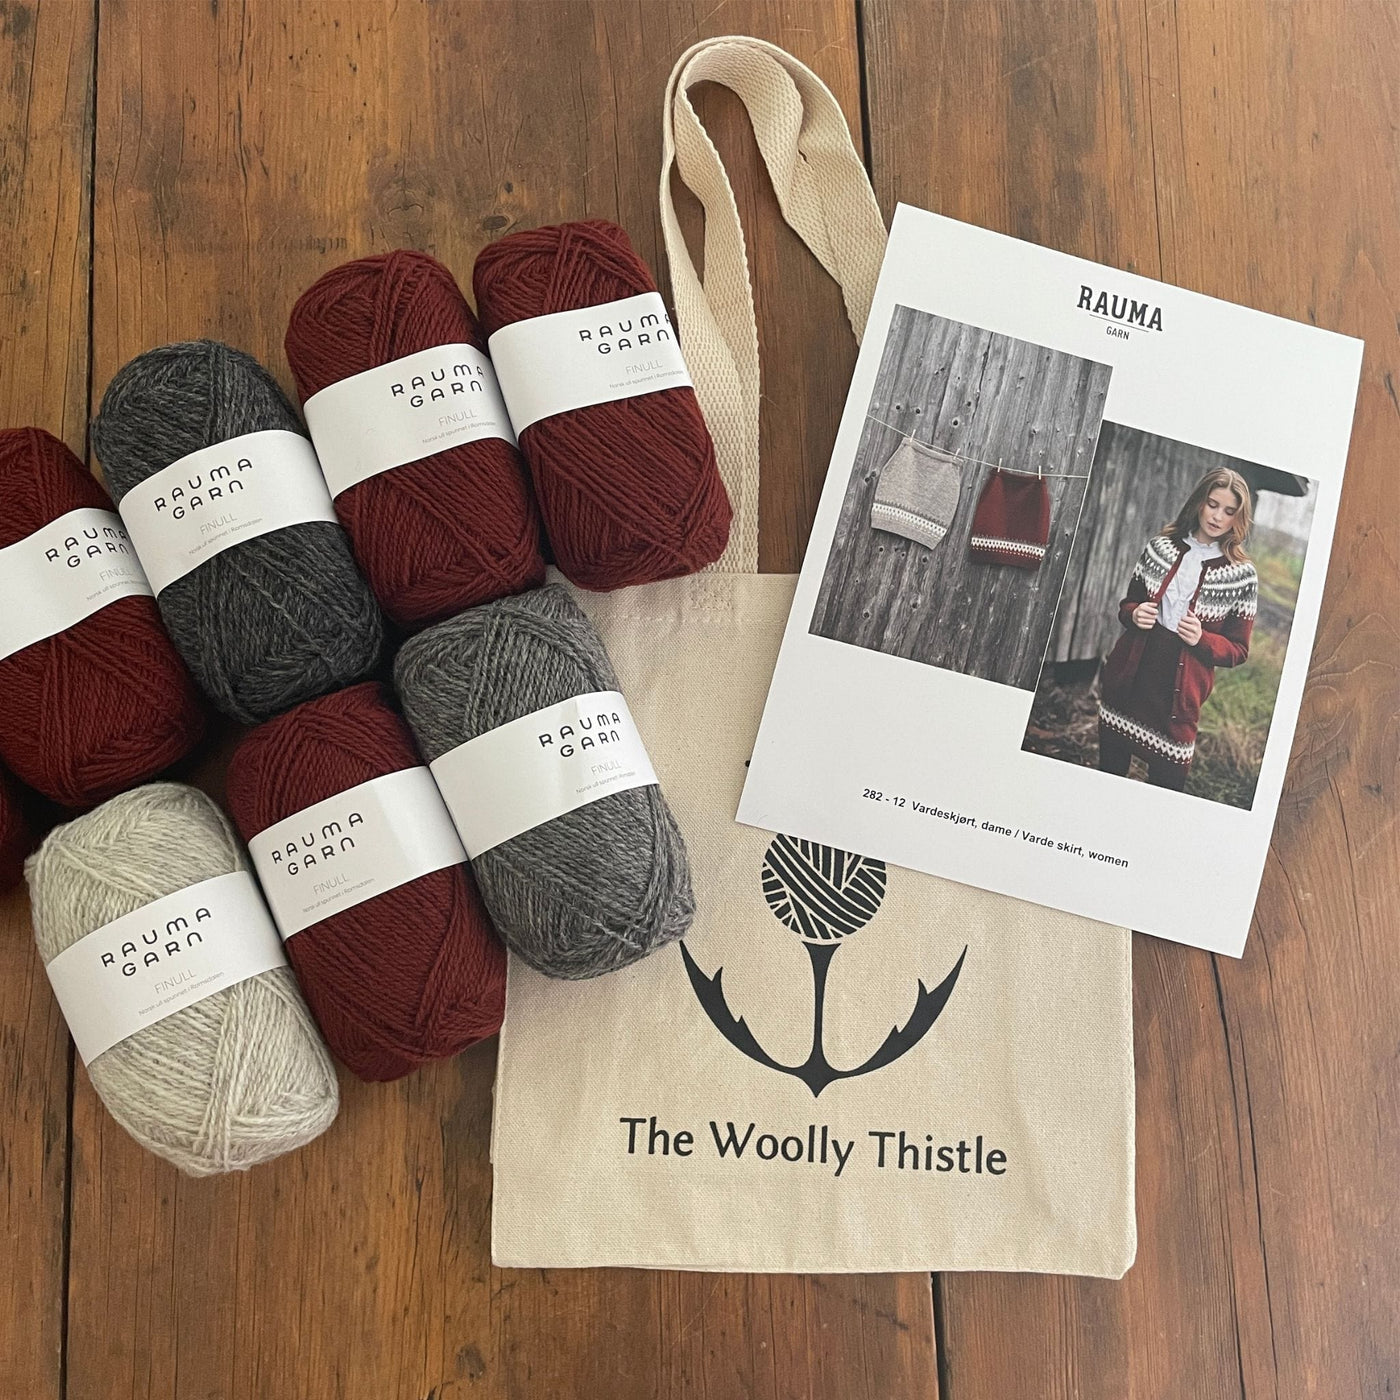 Components of the Varde Skirt Kit including pattern card, TWT Tote, and Rauma Finullgarn yarn in Burgundy and greys.